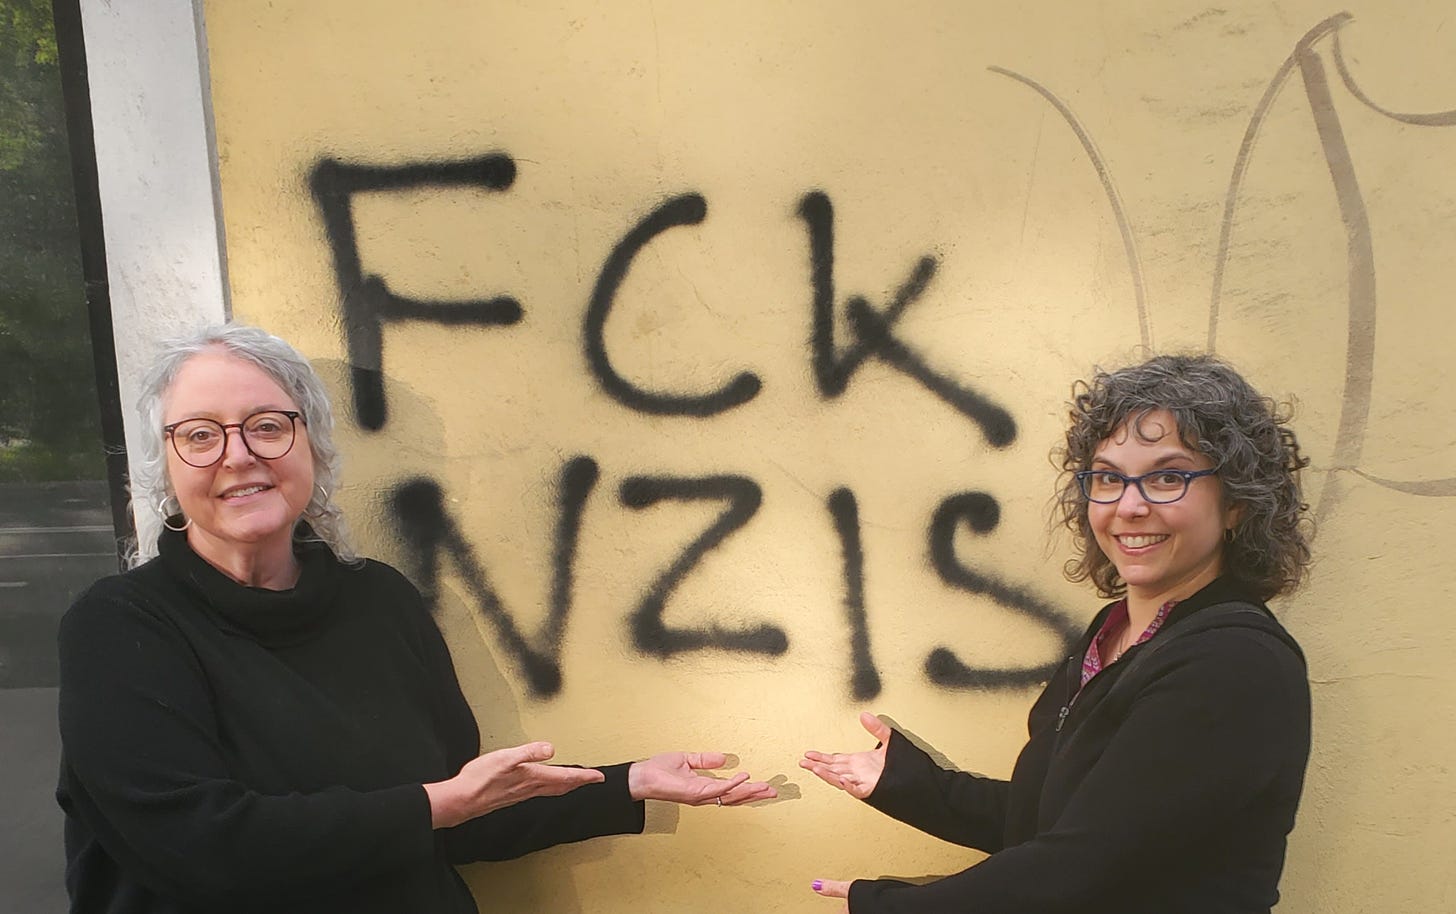 Two Jewish women in black tops, each wearing glasses, stand in front of graffiti that reads FCK NZIS